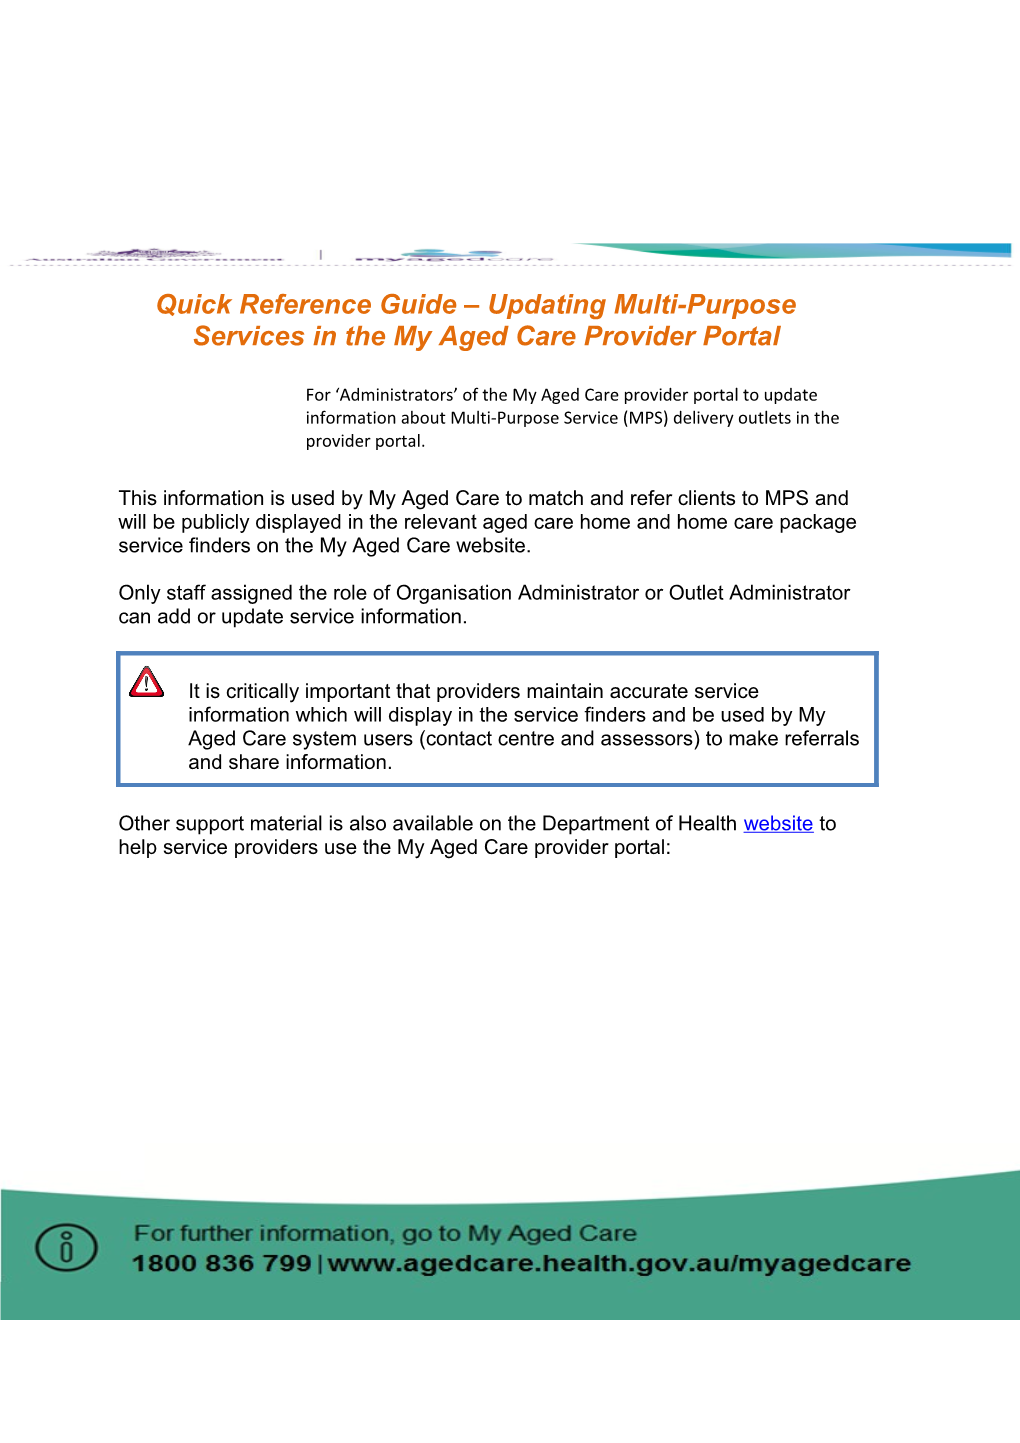 Quick Reference Guide Updating Multi-Purpose Services in the My Aged Care Provider Portal